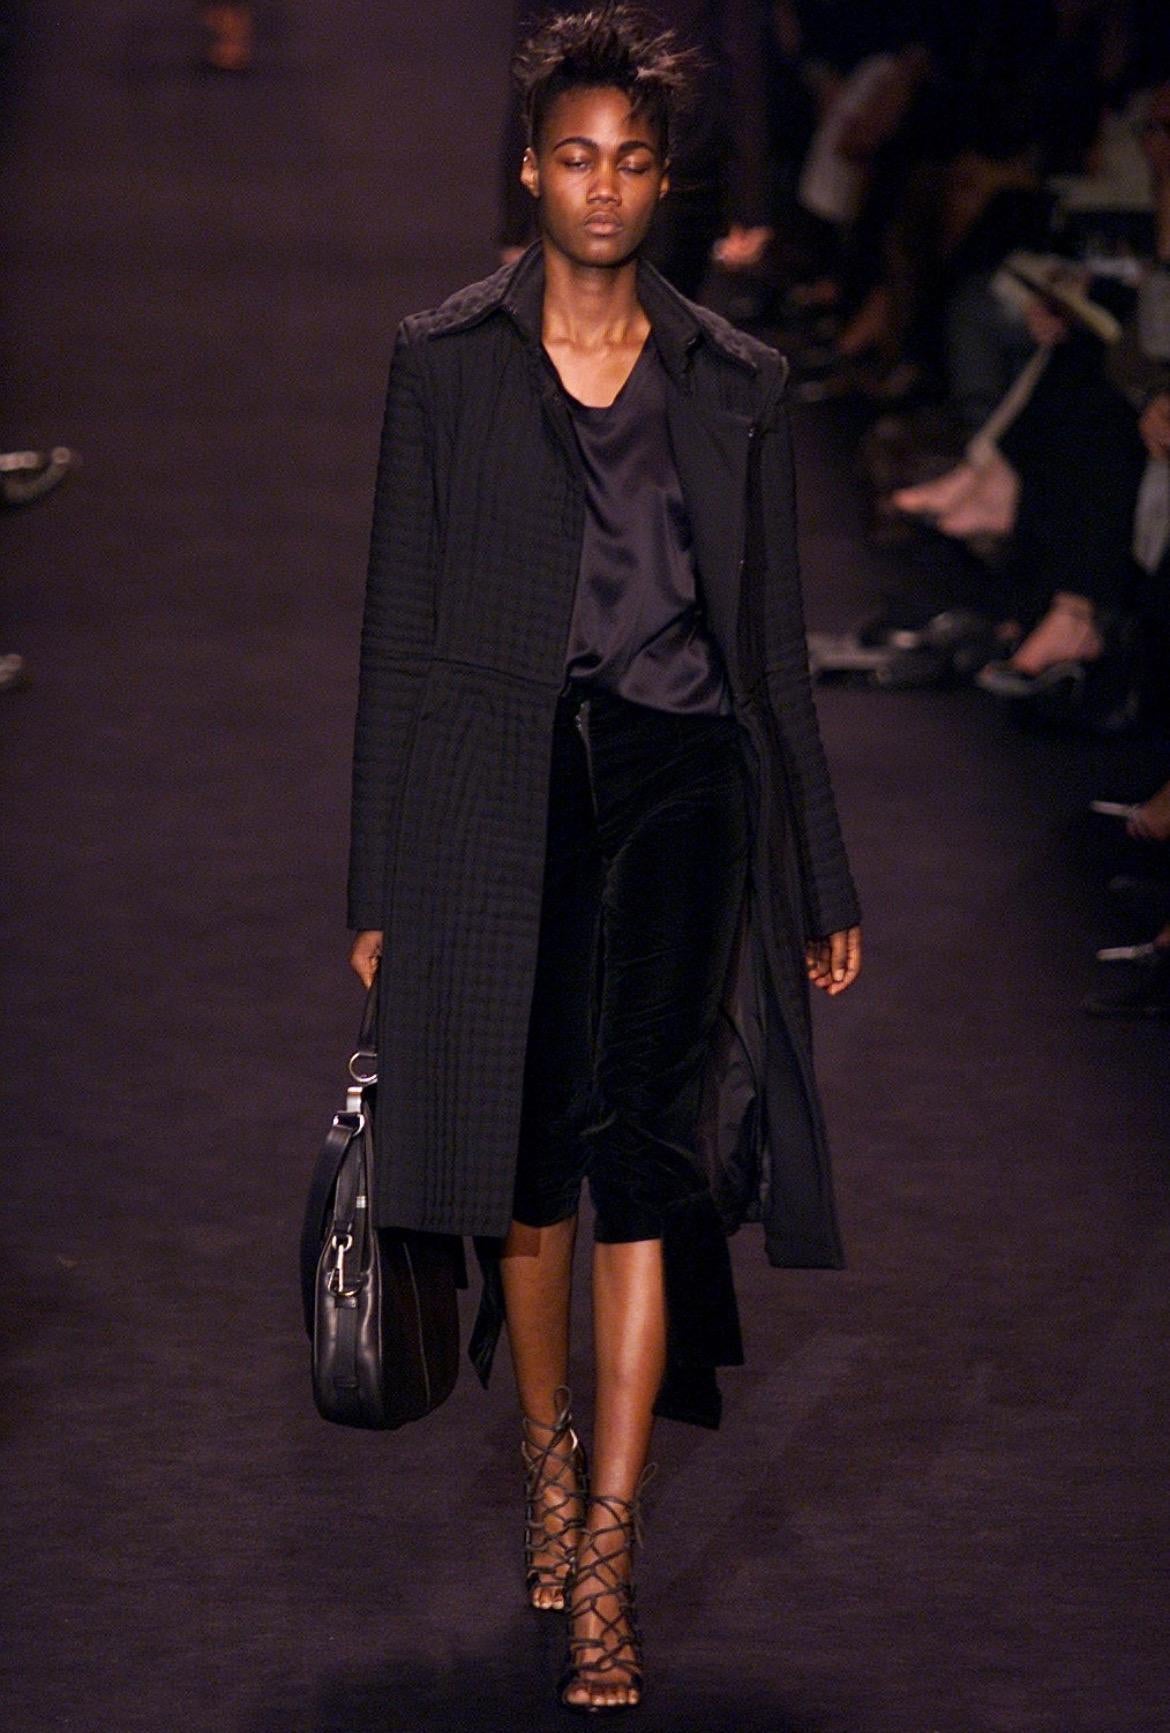 Presenting a deep navy Yves Saint Laurent Rive Gauche velvet skirt, designed by Tom Ford. From the Fall/Winter 2002 collection, this skirt debuted on the season's runway as part of look 17 modeled by Valery Prince and look 24 modeled by Karolina